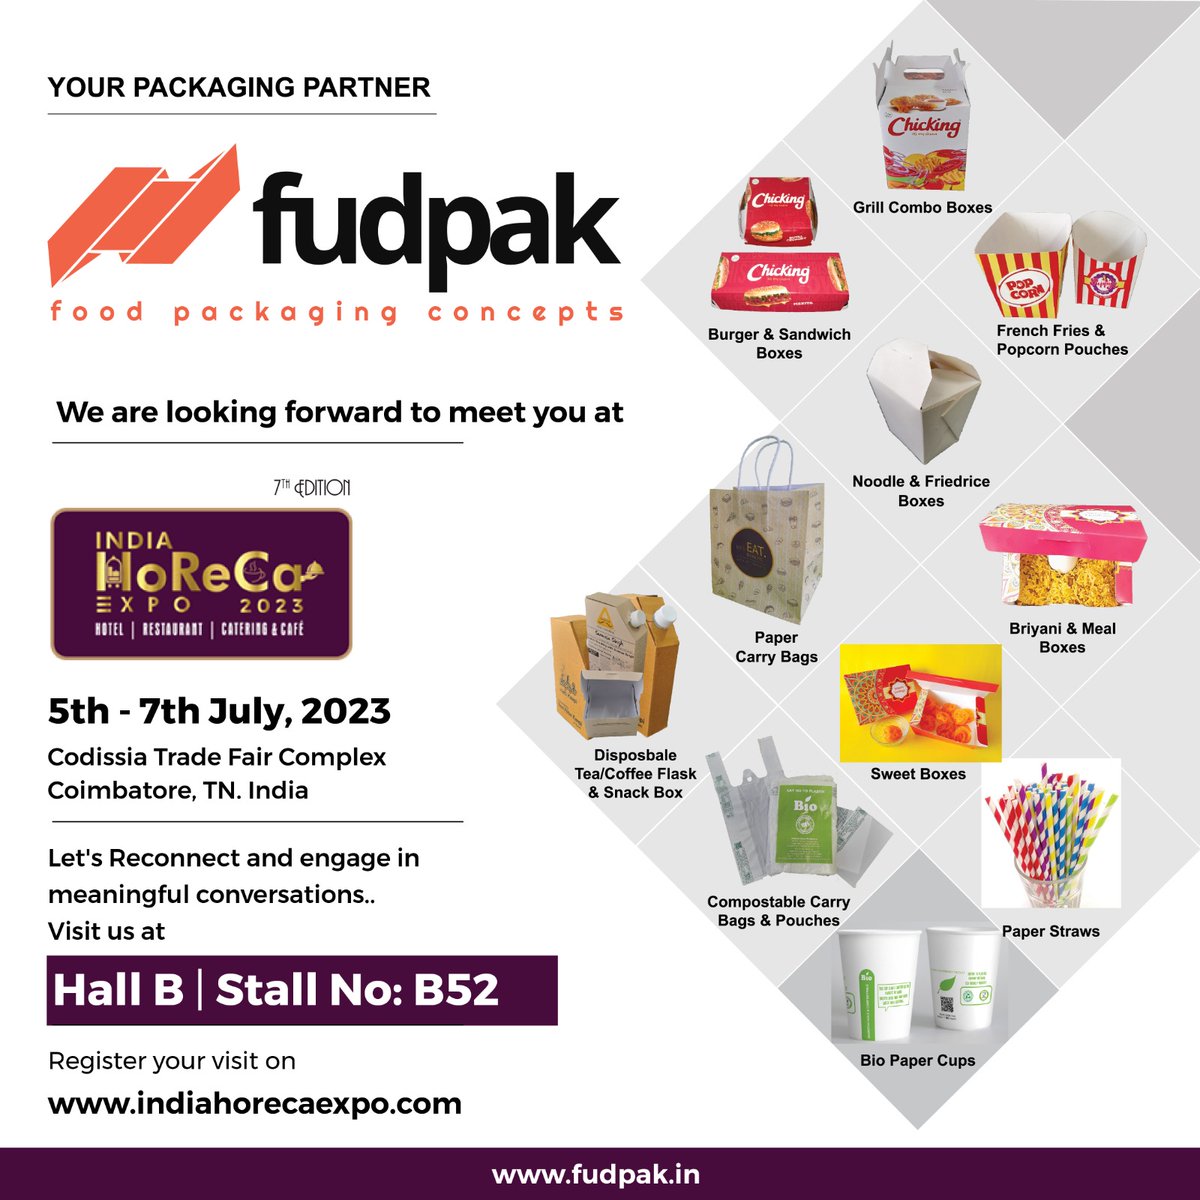 FUDPAK focuses on minimizing plastic use and providing alternate packaging solutions with one of the oldest raw material - Paper.
Register on: indiahorecaexpo.com/visitor-reg-cm… to meet Fudpak at IHE 2023
#sustainable #packaging #food #foodpackaging #foodpackage #foodgrade